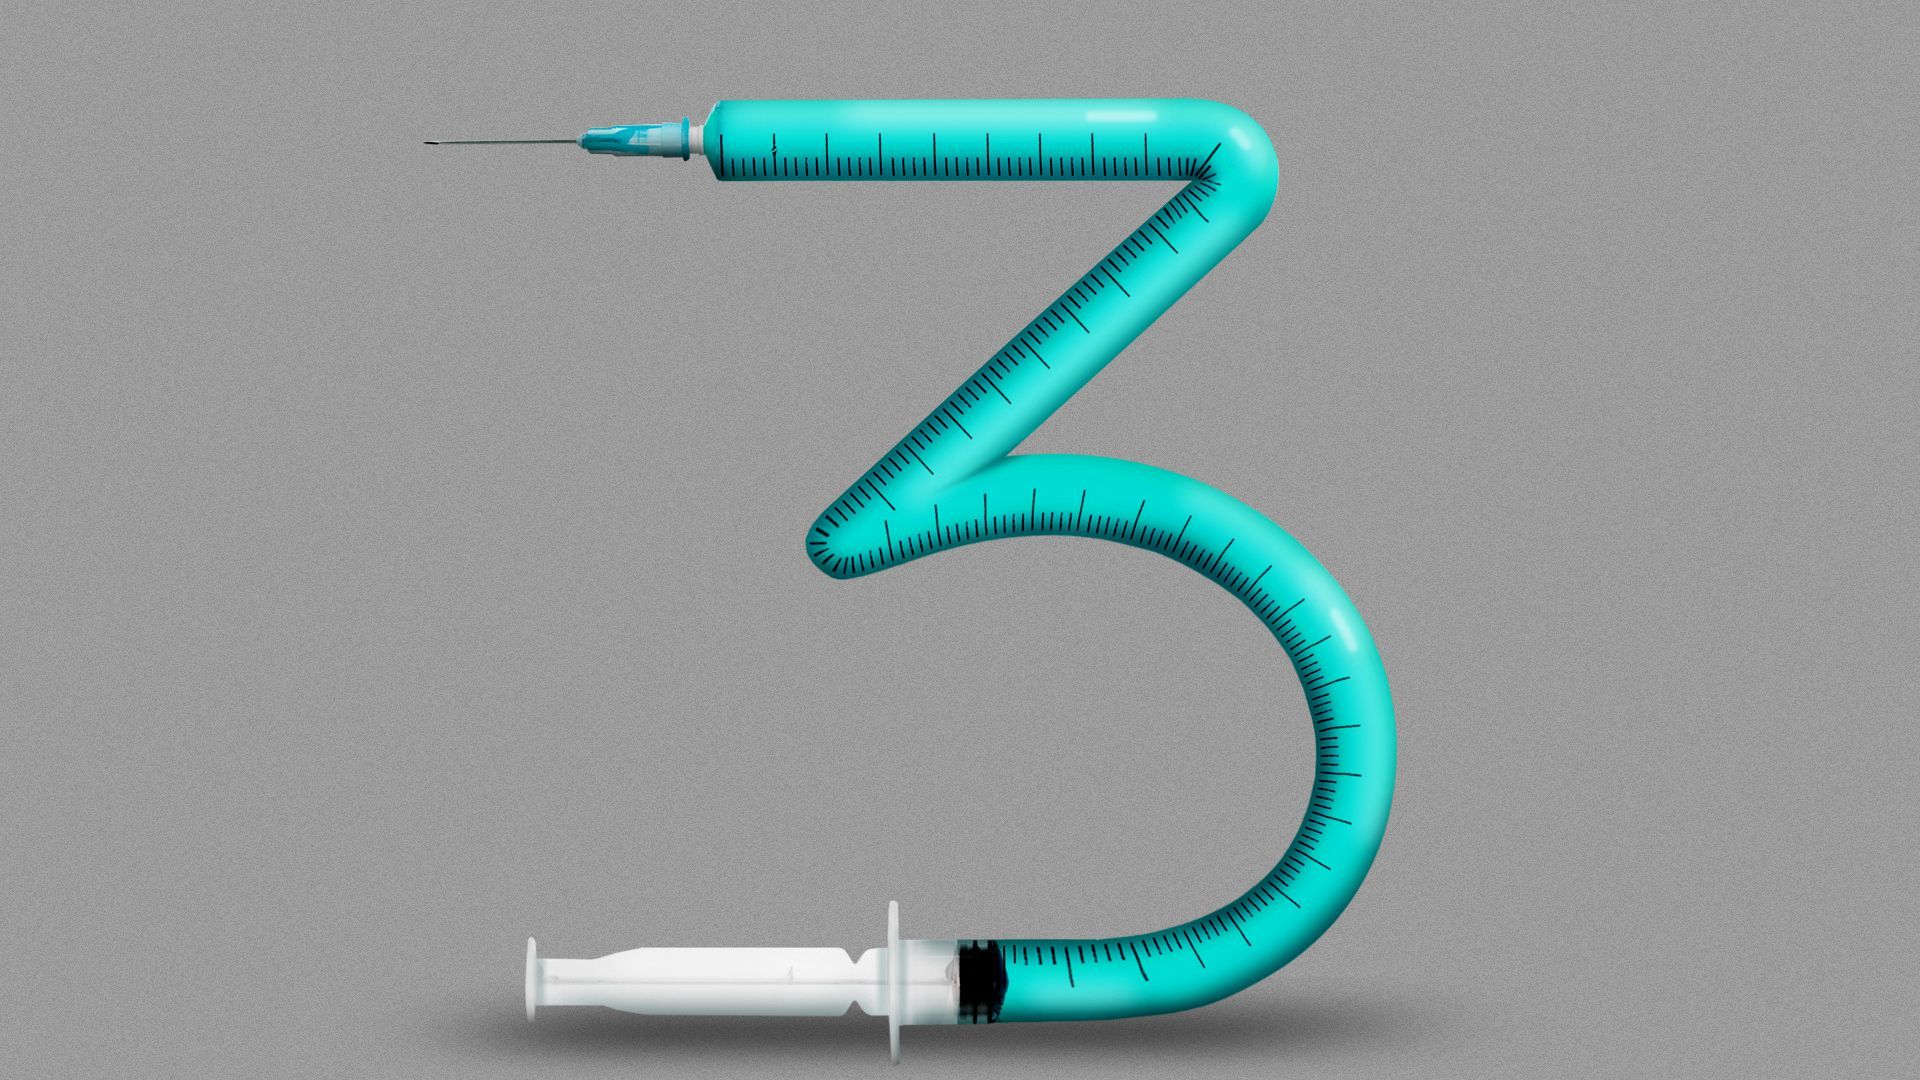 Illustration of a syringe bent into the shape of a number three